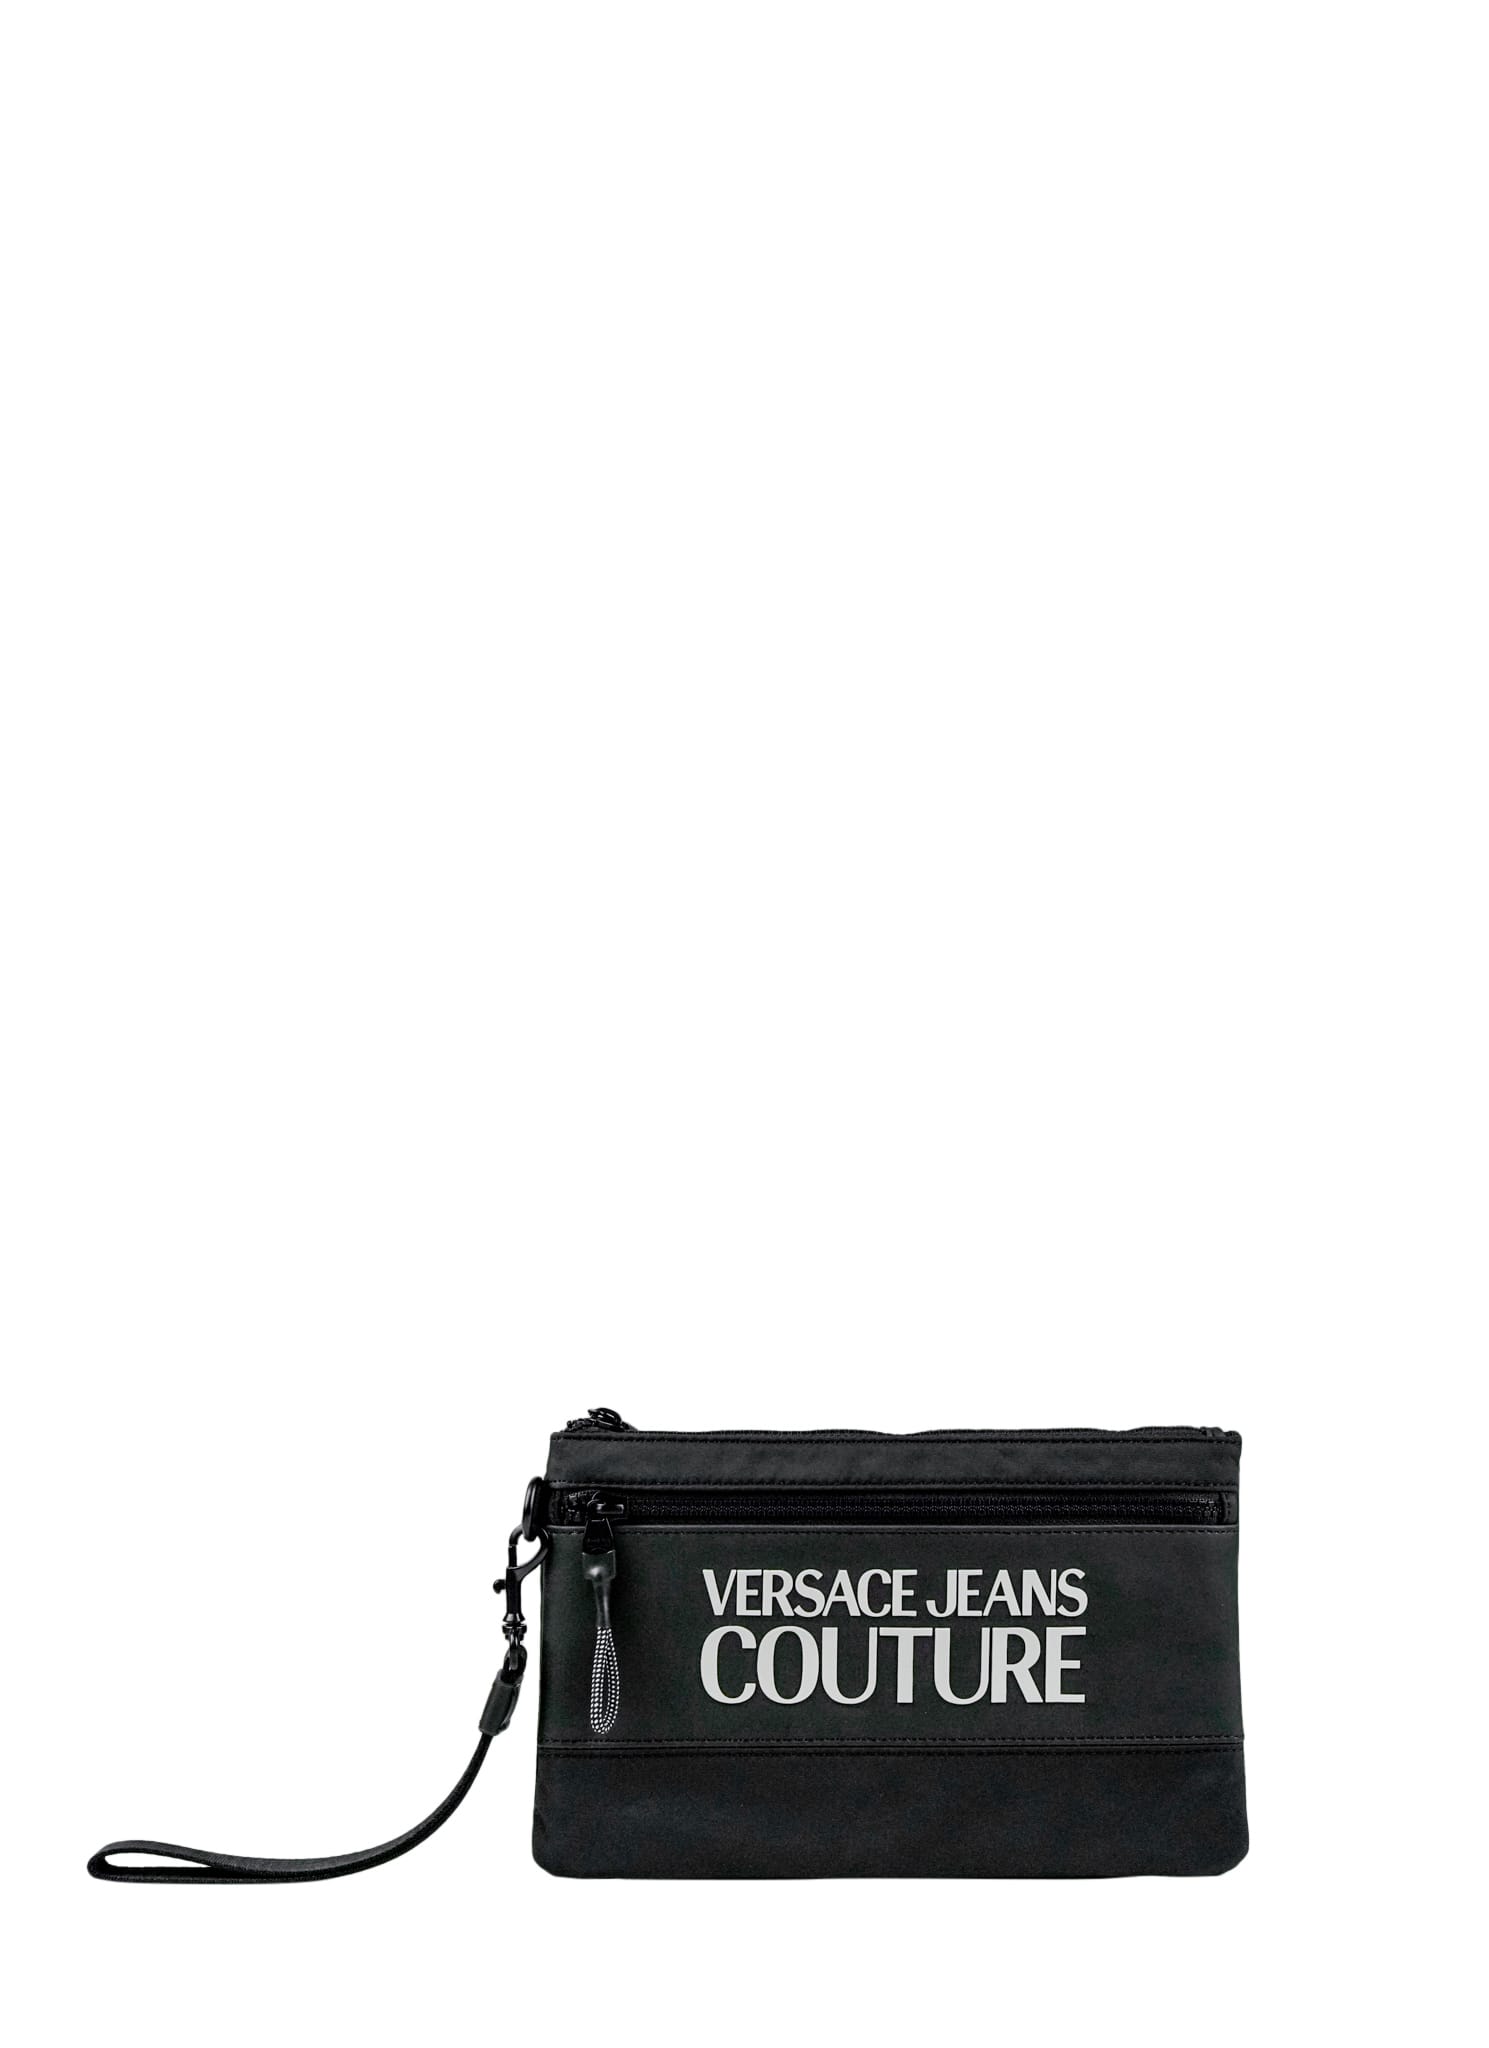 Versace Jeans Couture Range Logo Type Tote